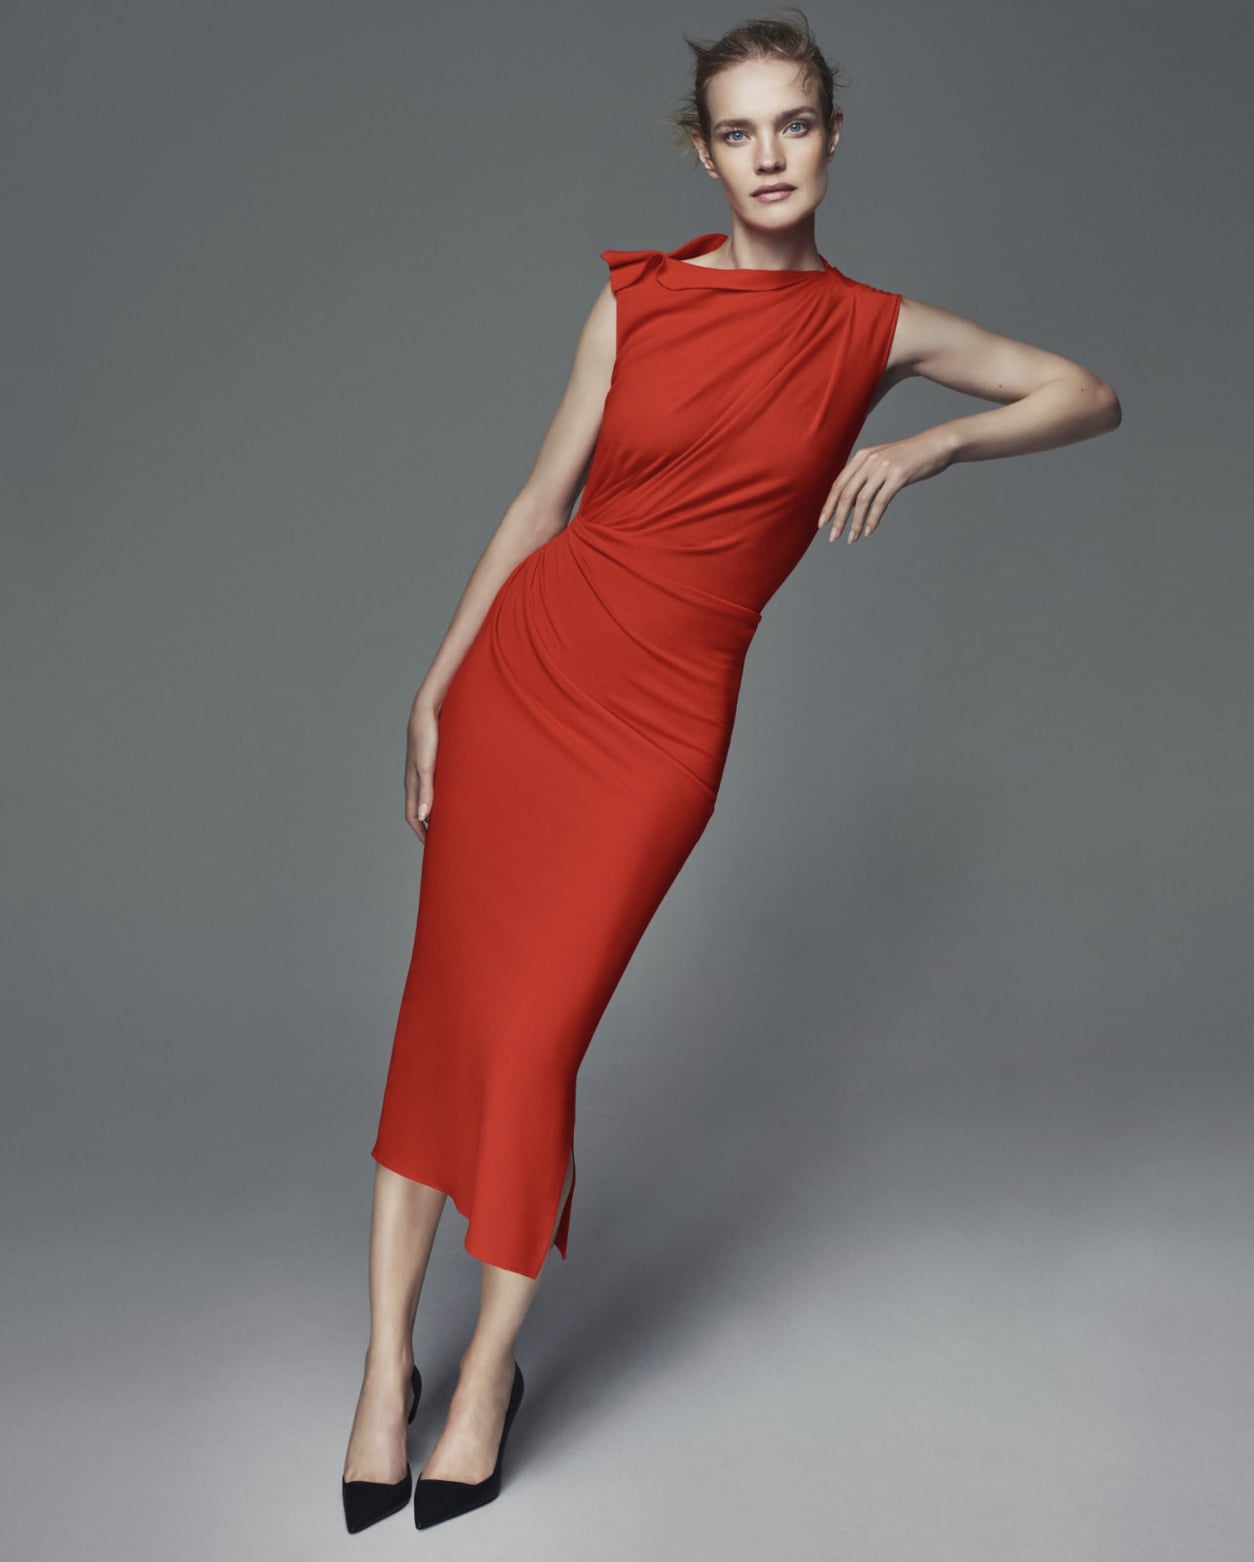 Shop the Zara x Narciso Rodriguez Collection, 2022